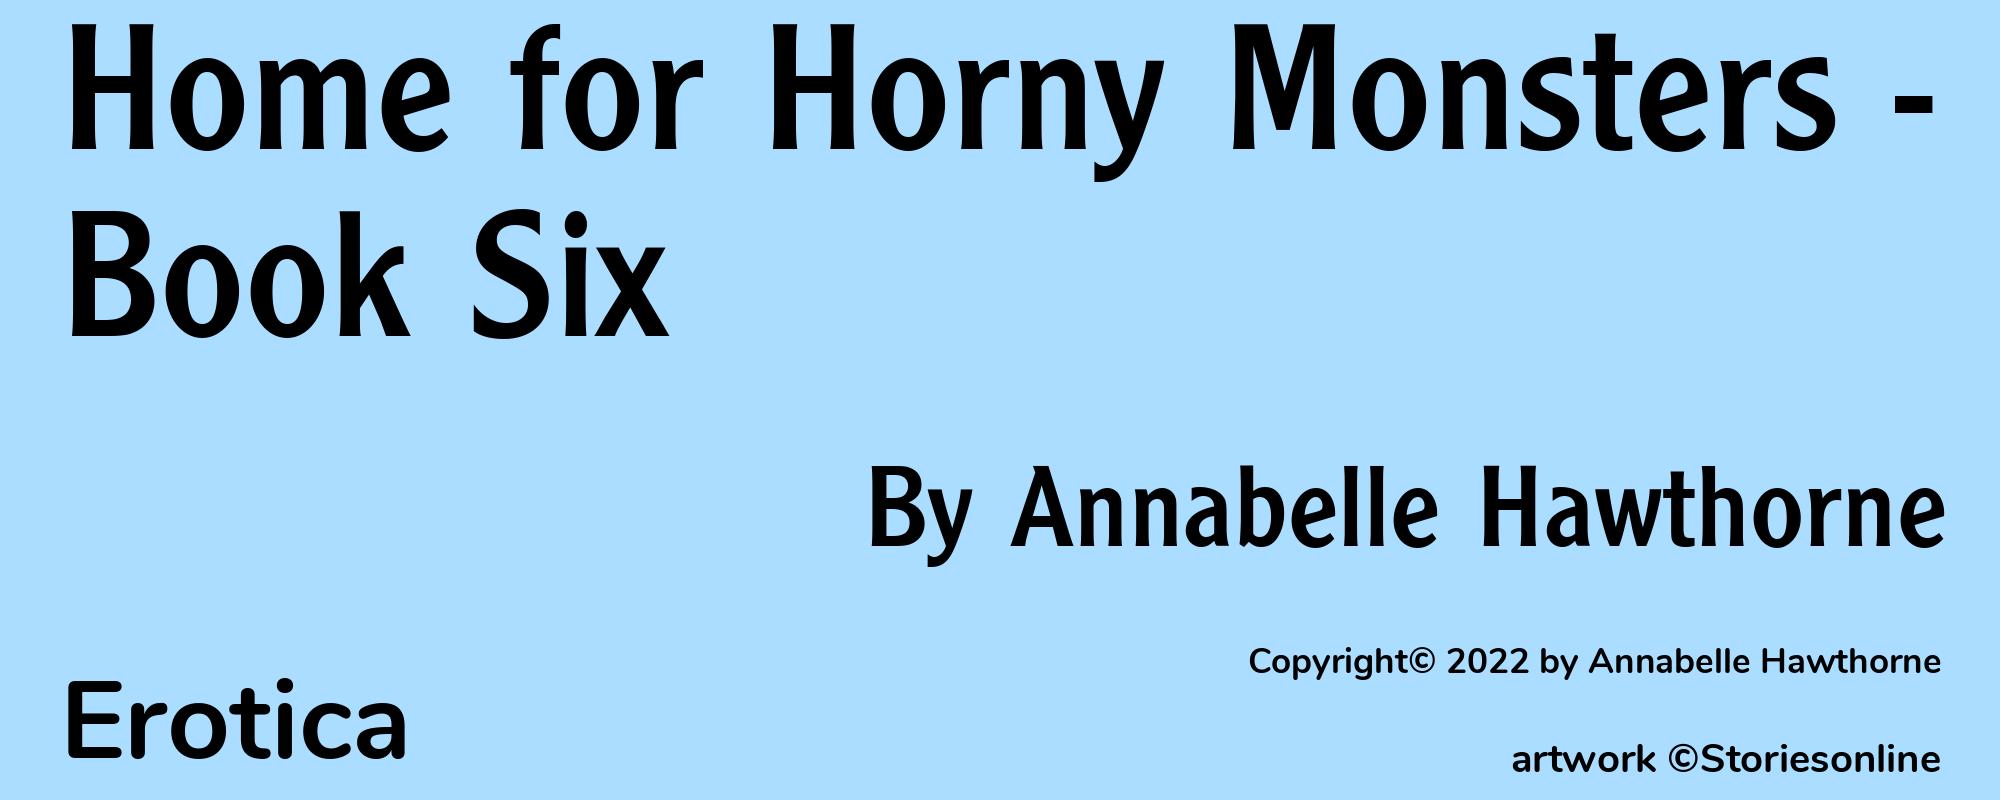 Home for Horny Monsters - Book Six - Cover